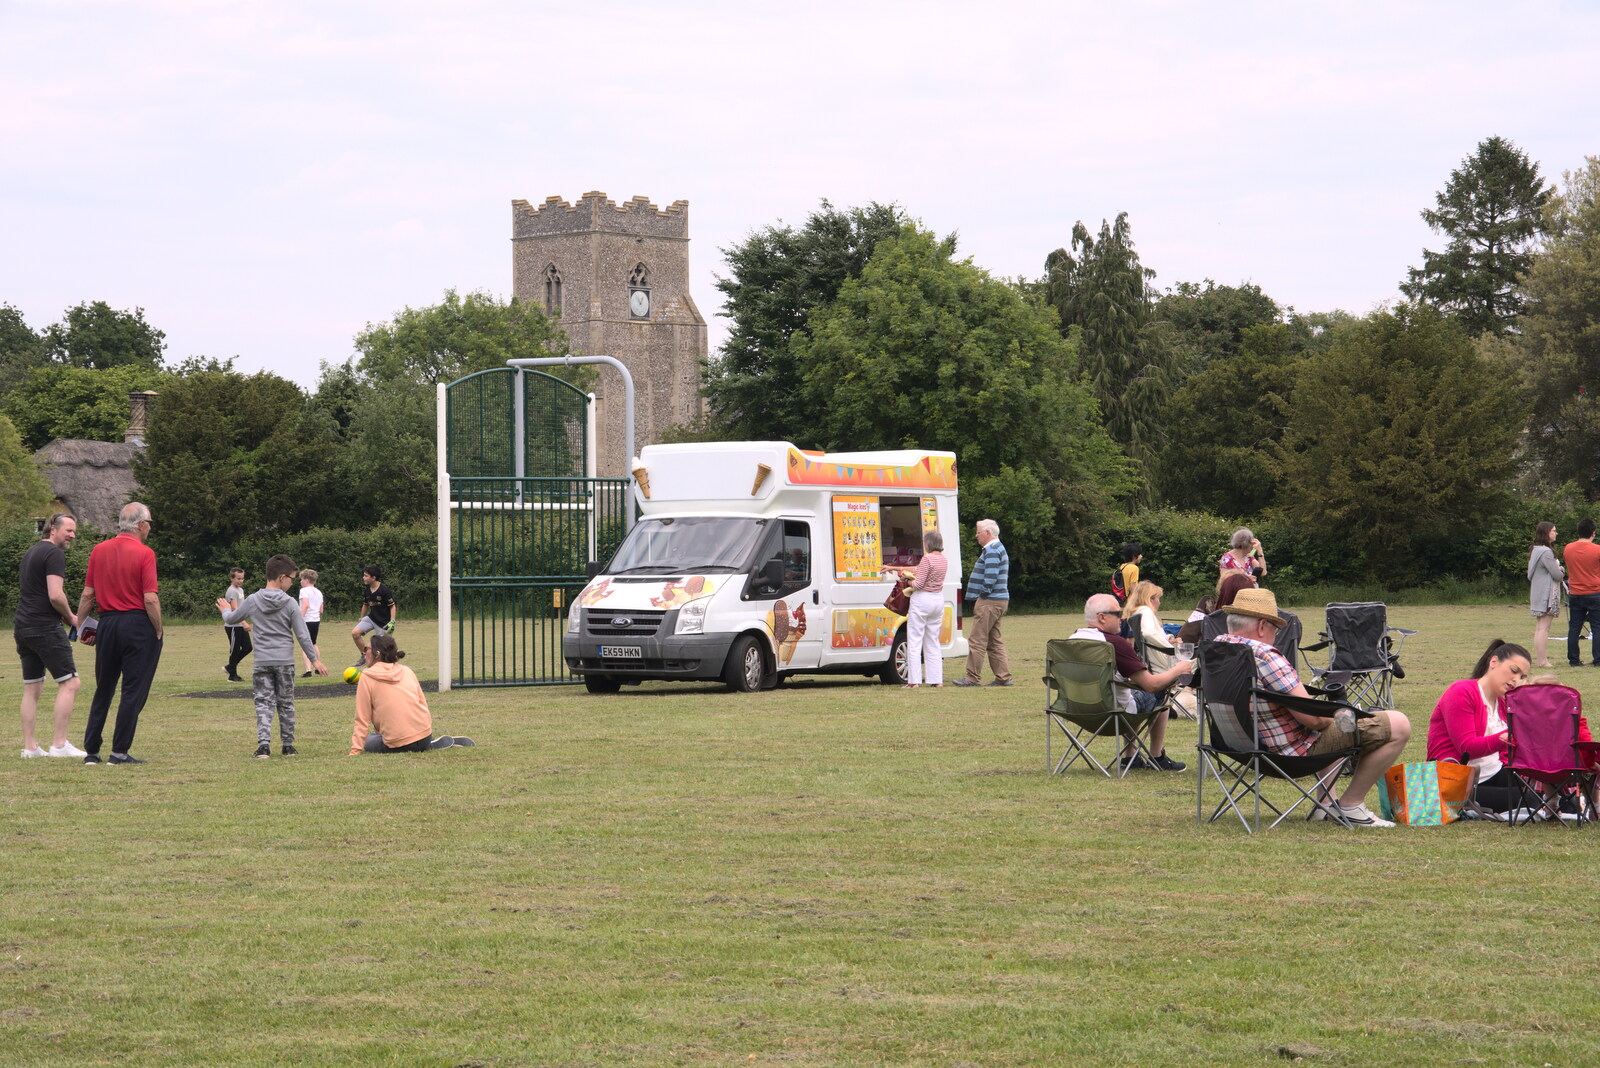 There's an ice-cream van on hand from The Gislingham Silver Band at Barningham, Suffolk - 3rd June 2022